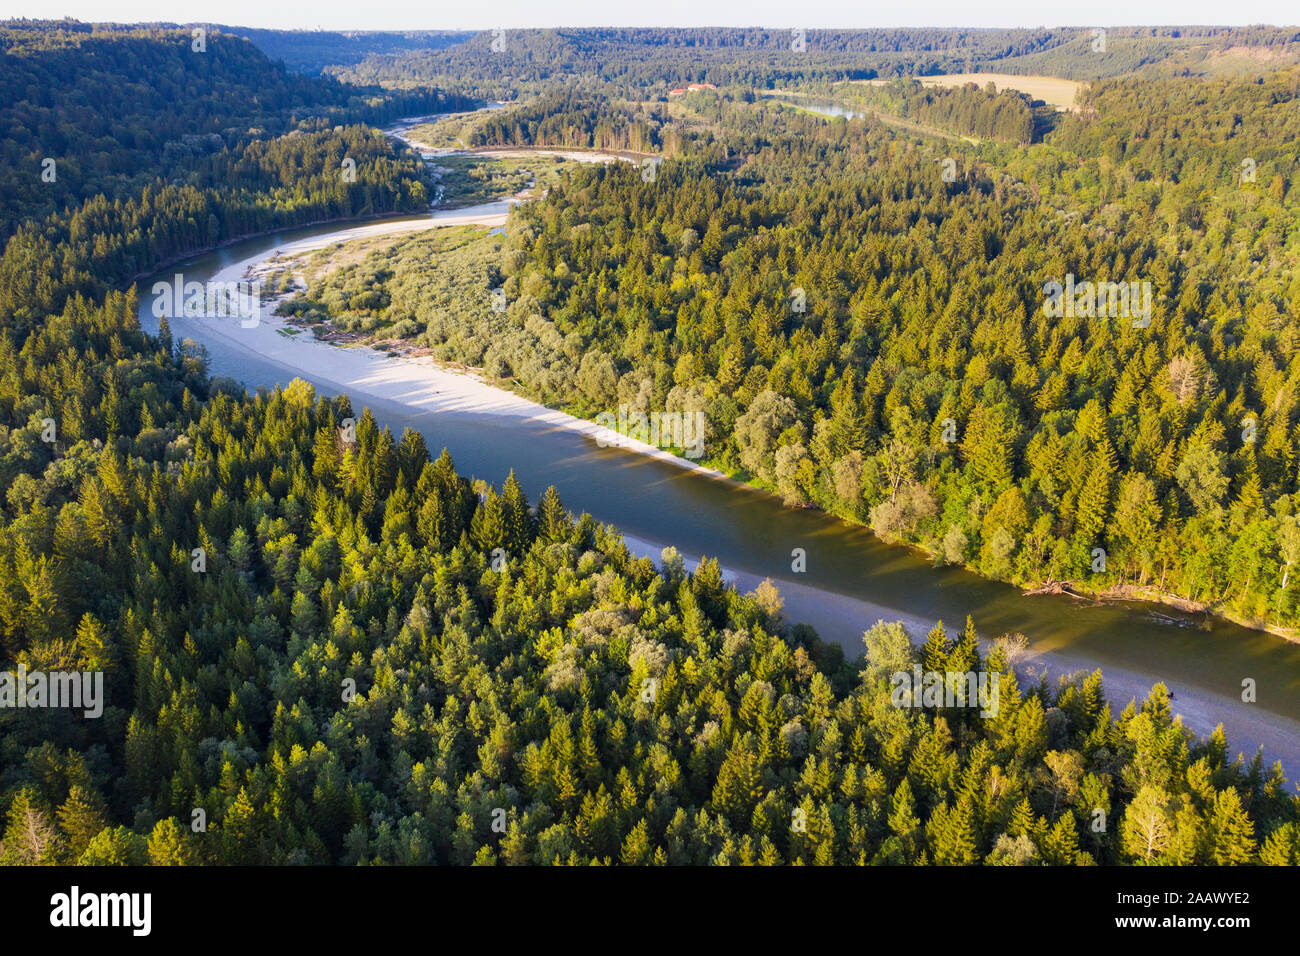 Germany, Bavaria, Schftlarn, aerial view of Isar river Stock Photo